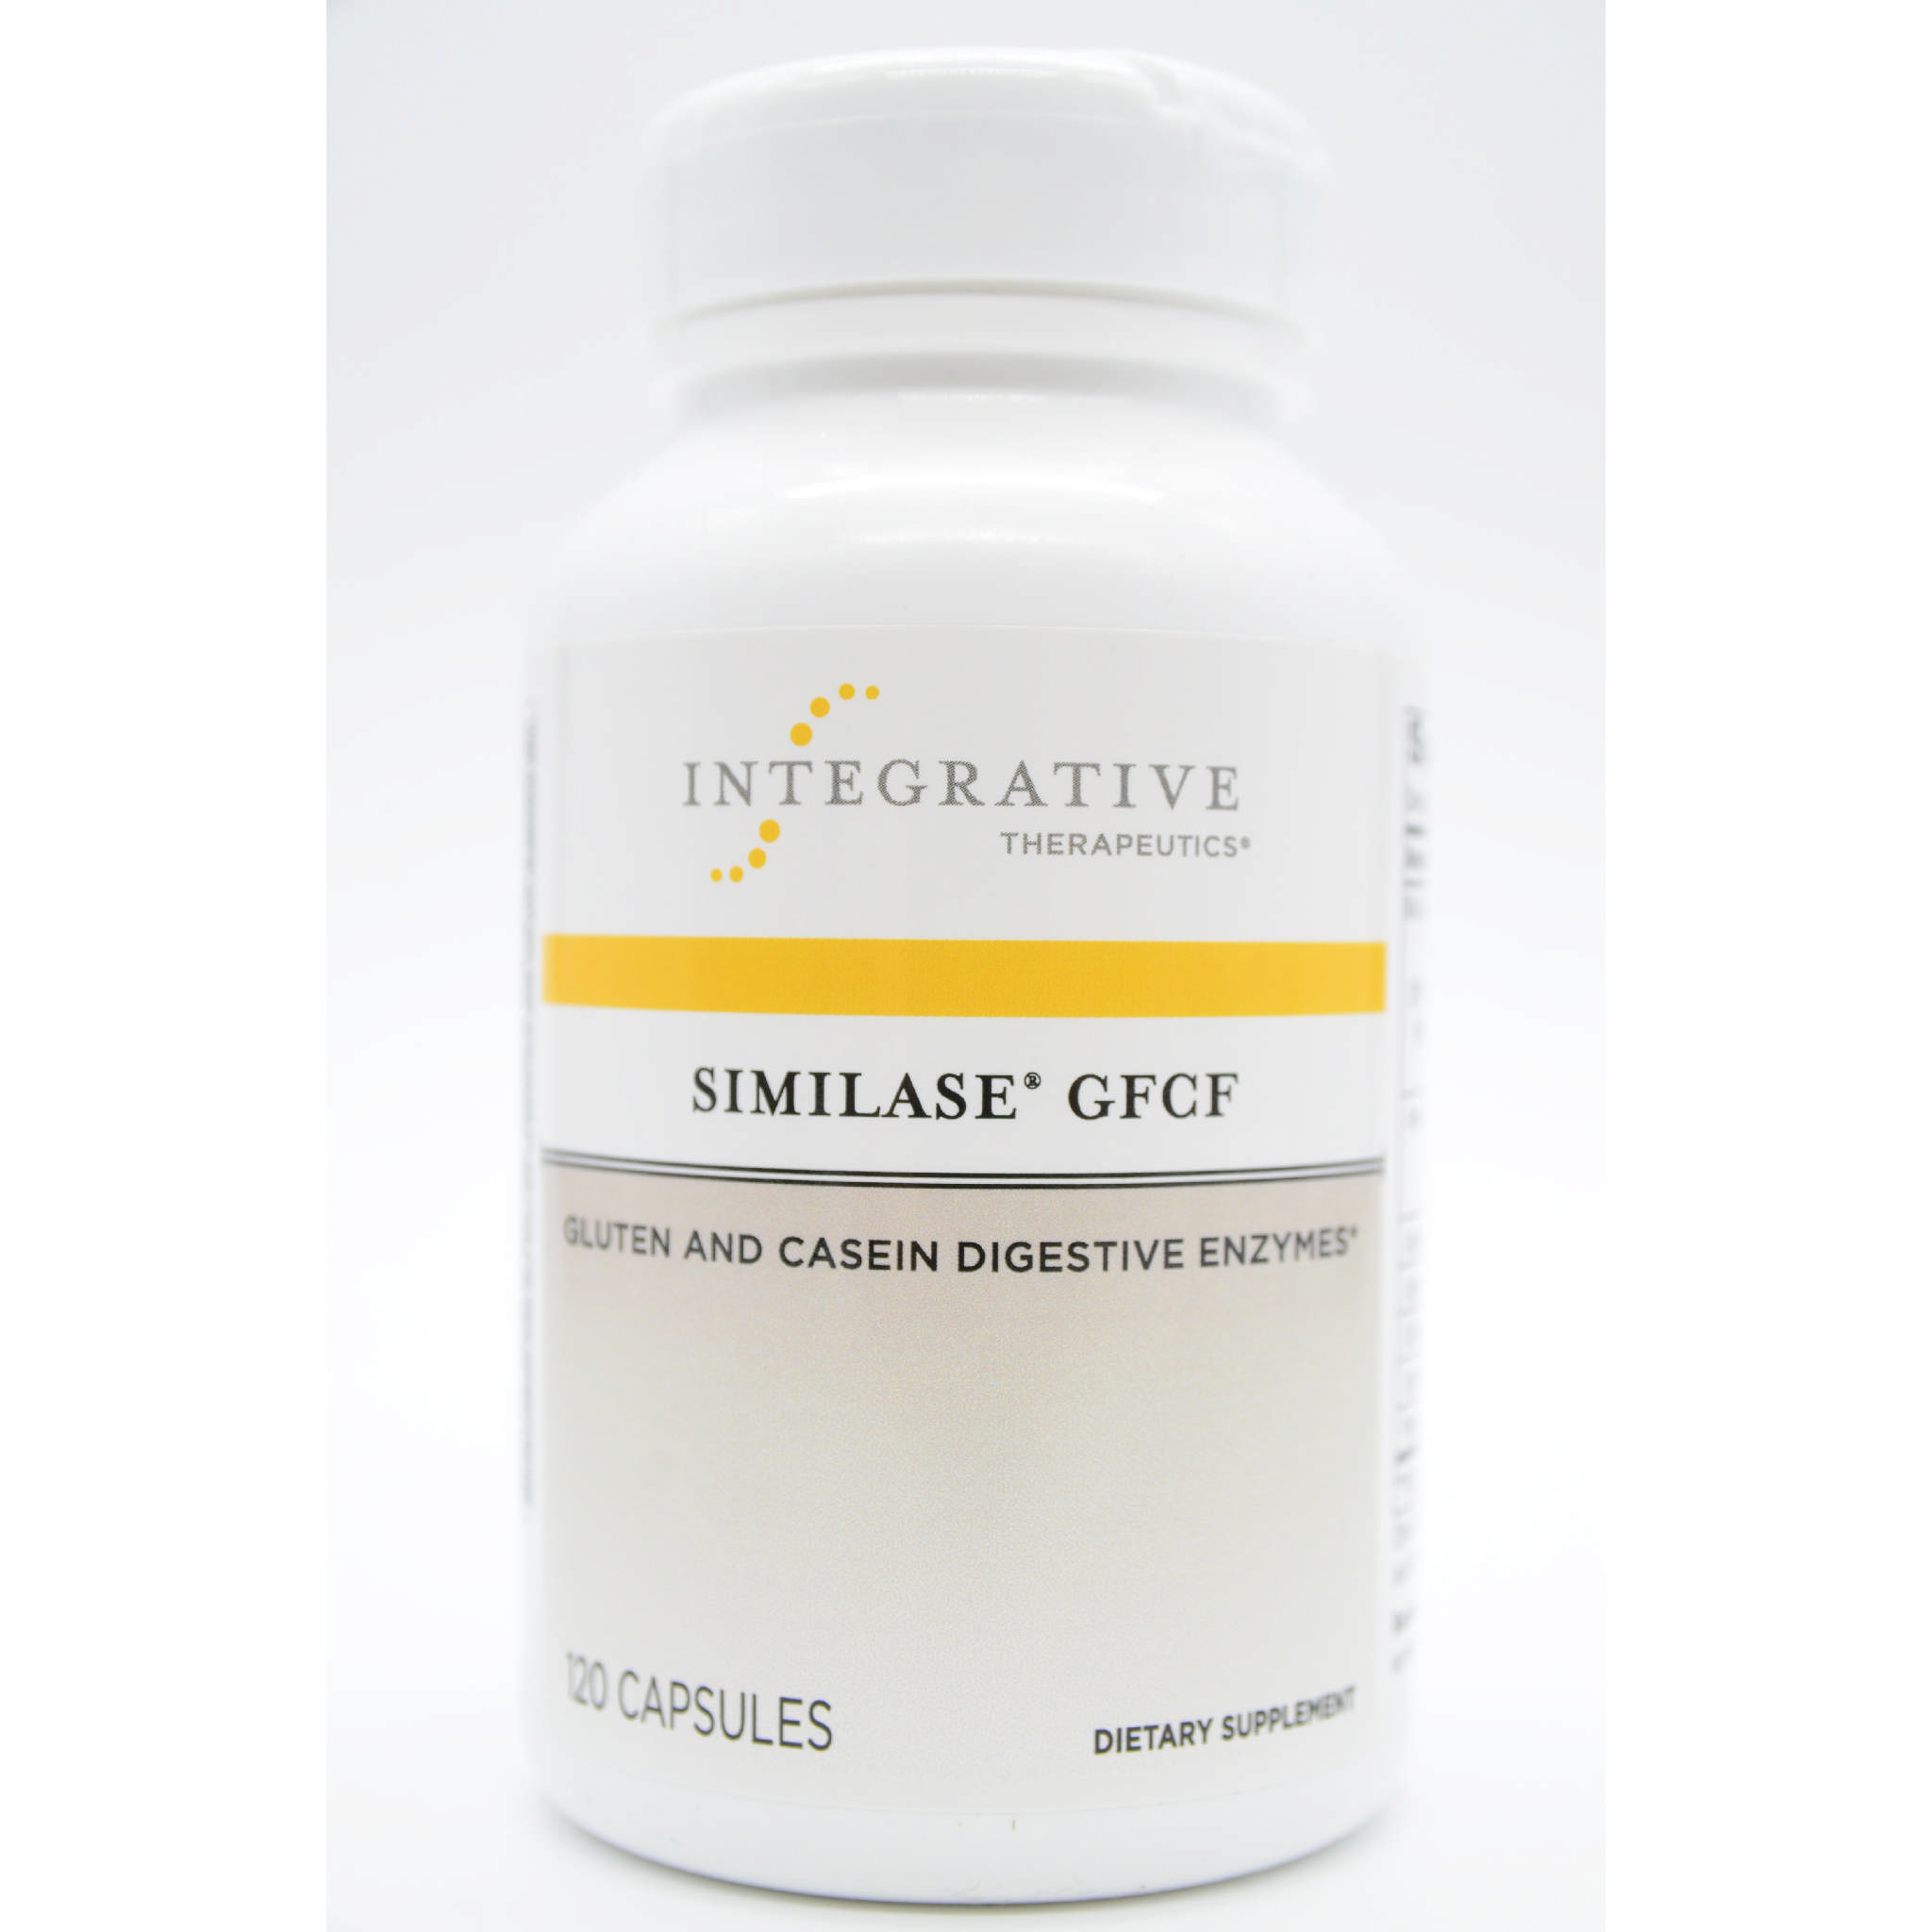 Integrative Therapy - Similase Gfcf